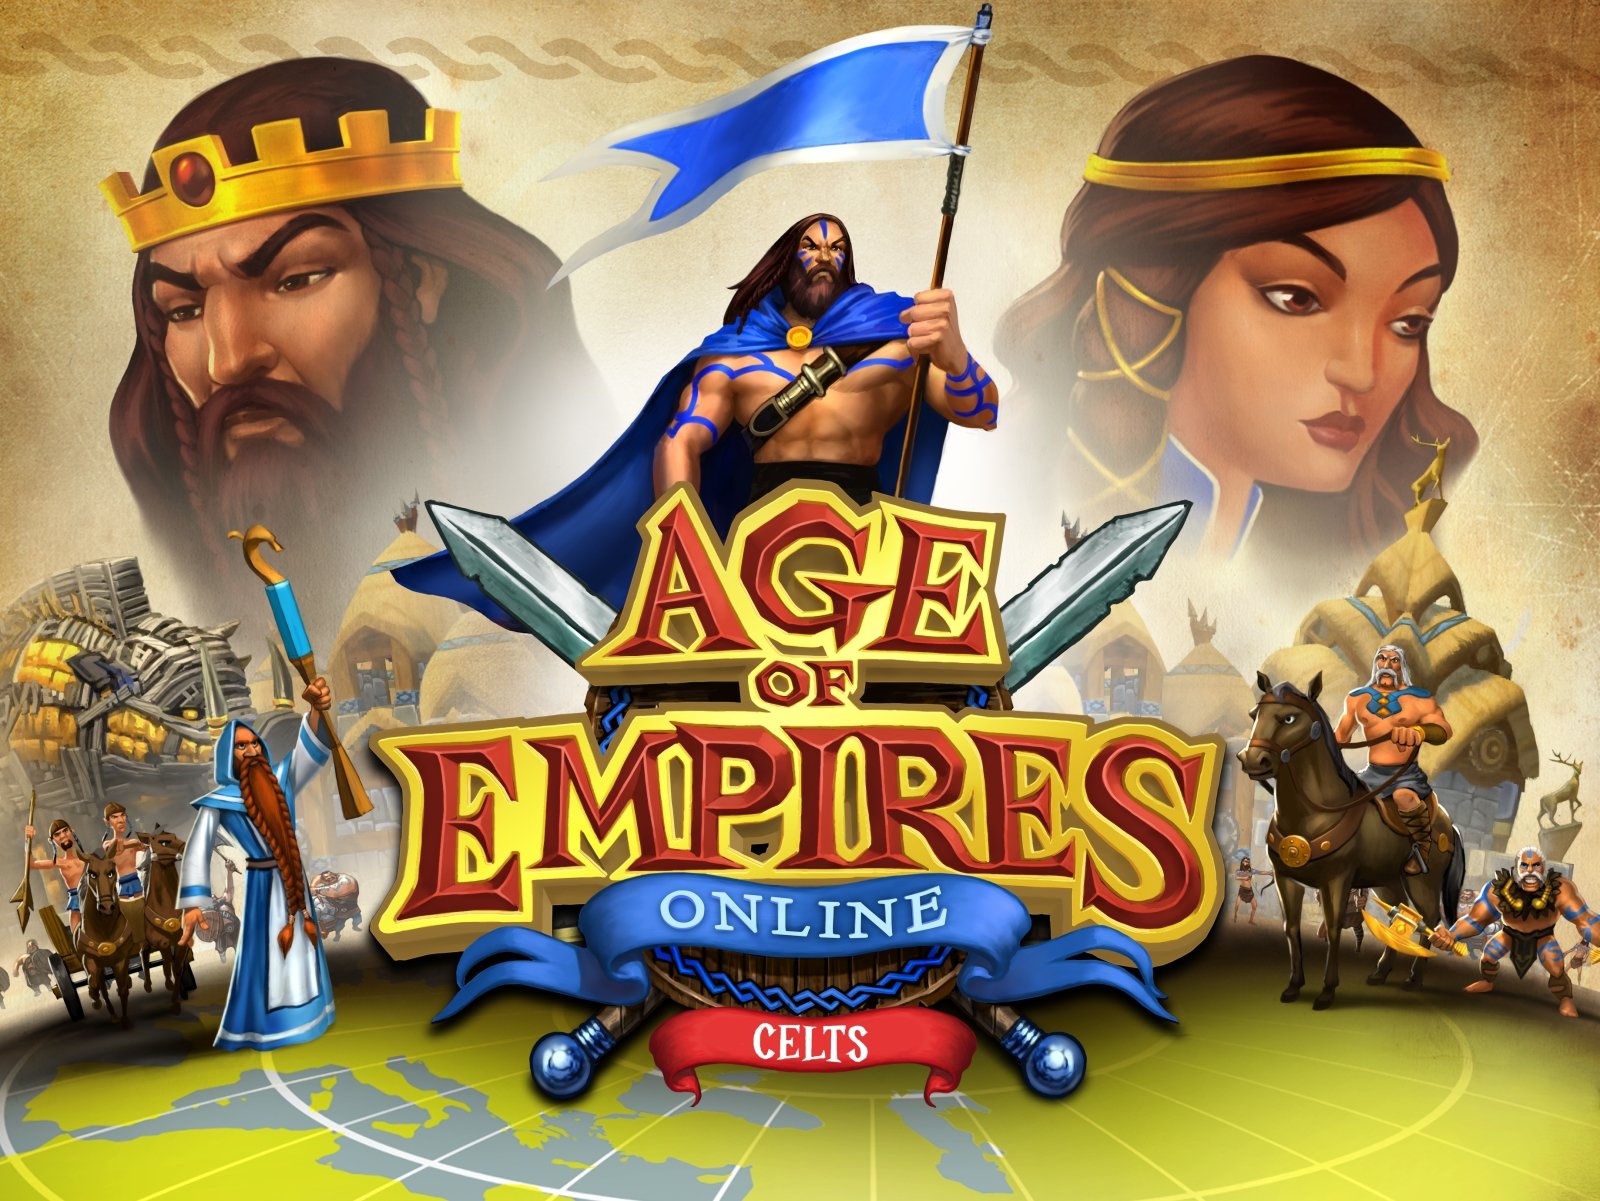 age of empires hd steam download free